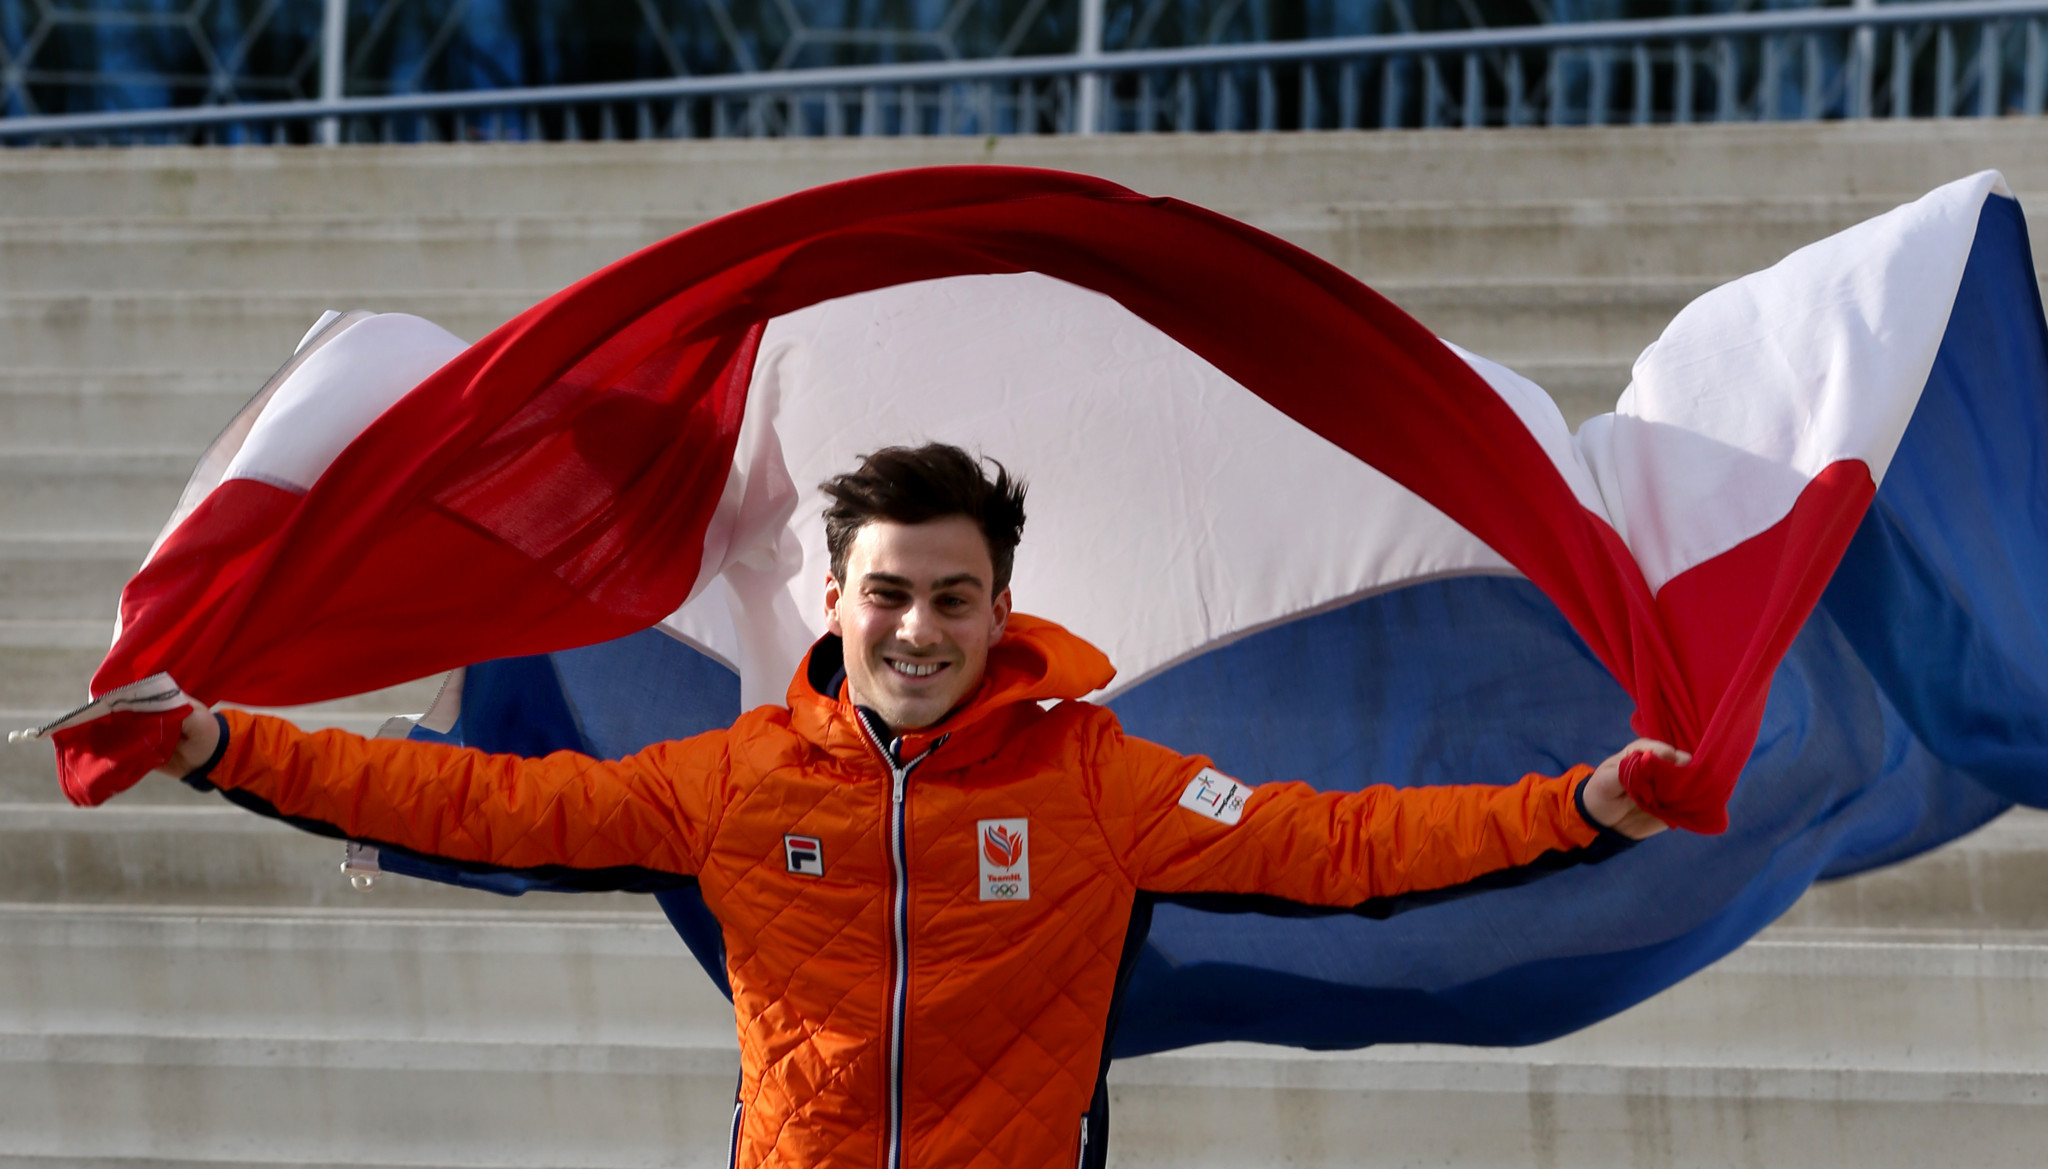 Dutch speed skater Jan Smeekens poses with his country's flag after being selected as flagbearer  ©Getty Images